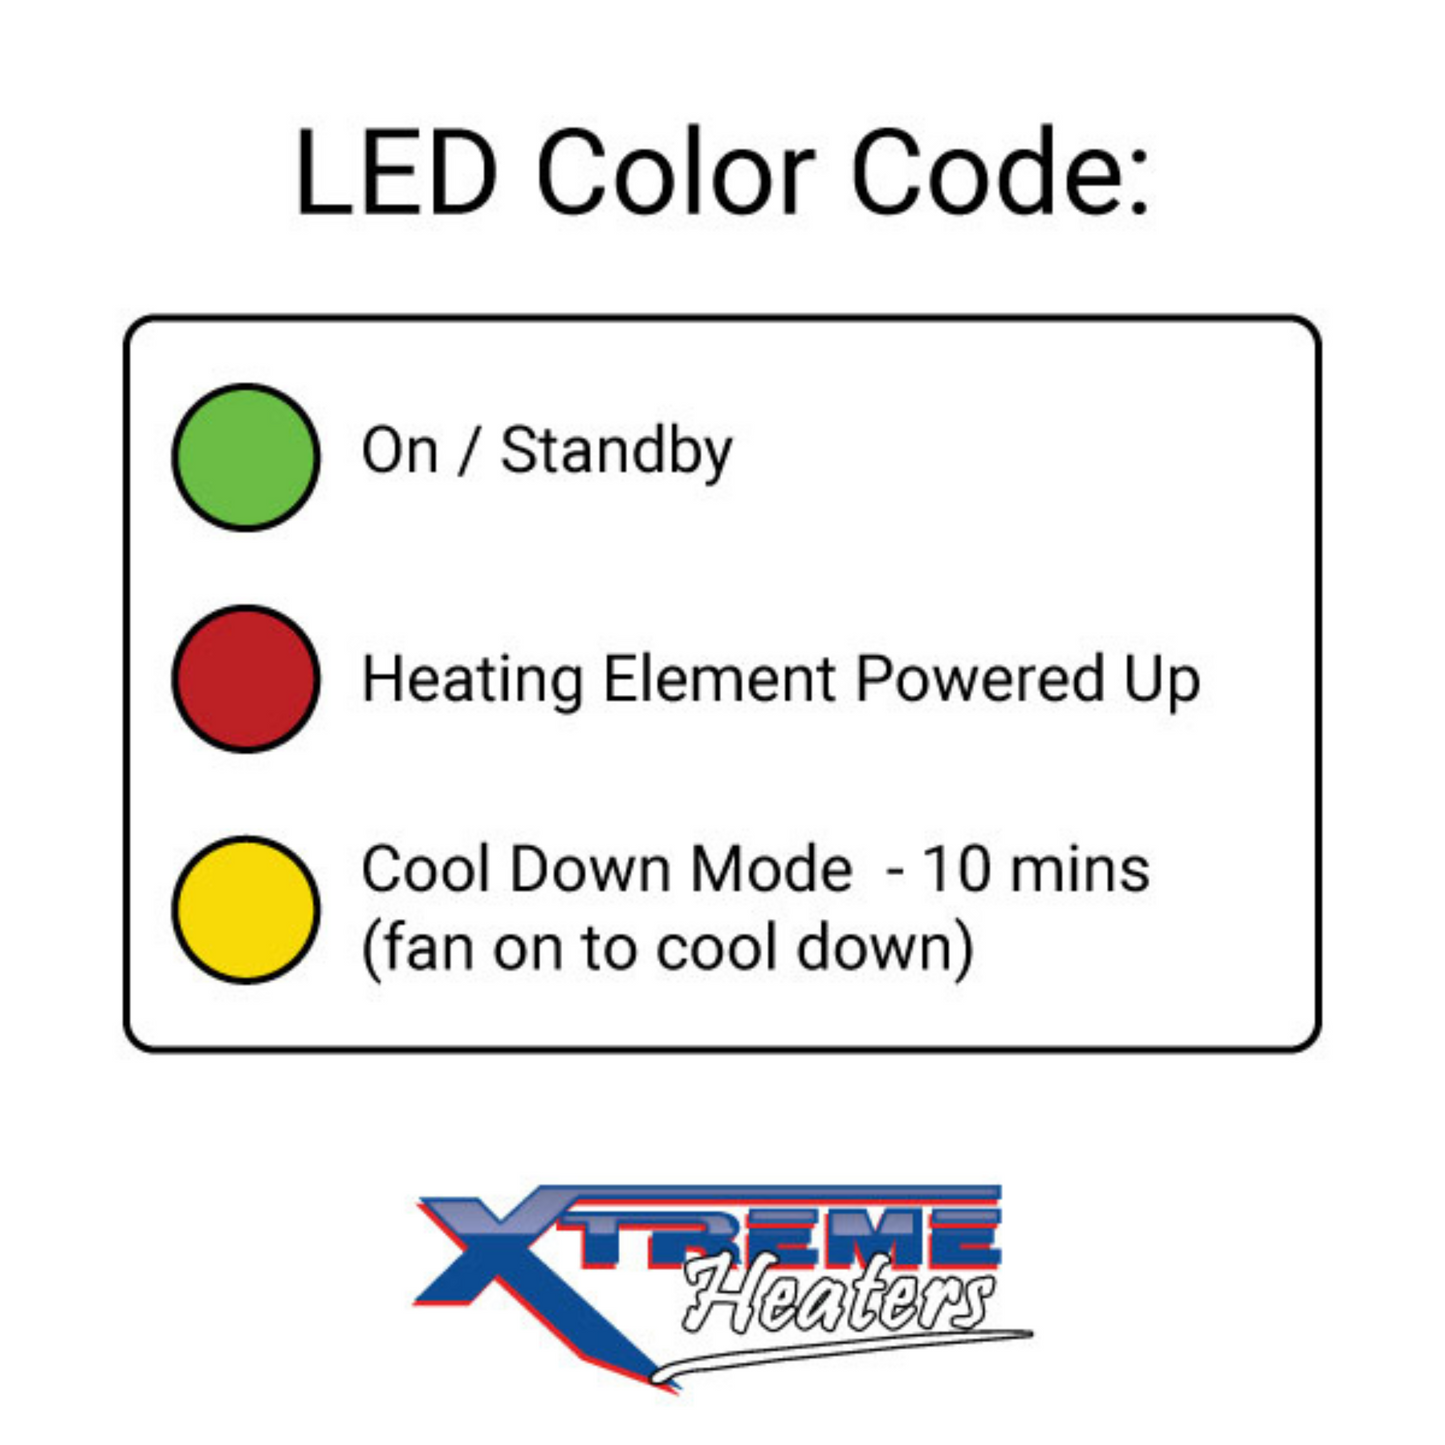 How the LED on the back of Xtreme Heaters works.